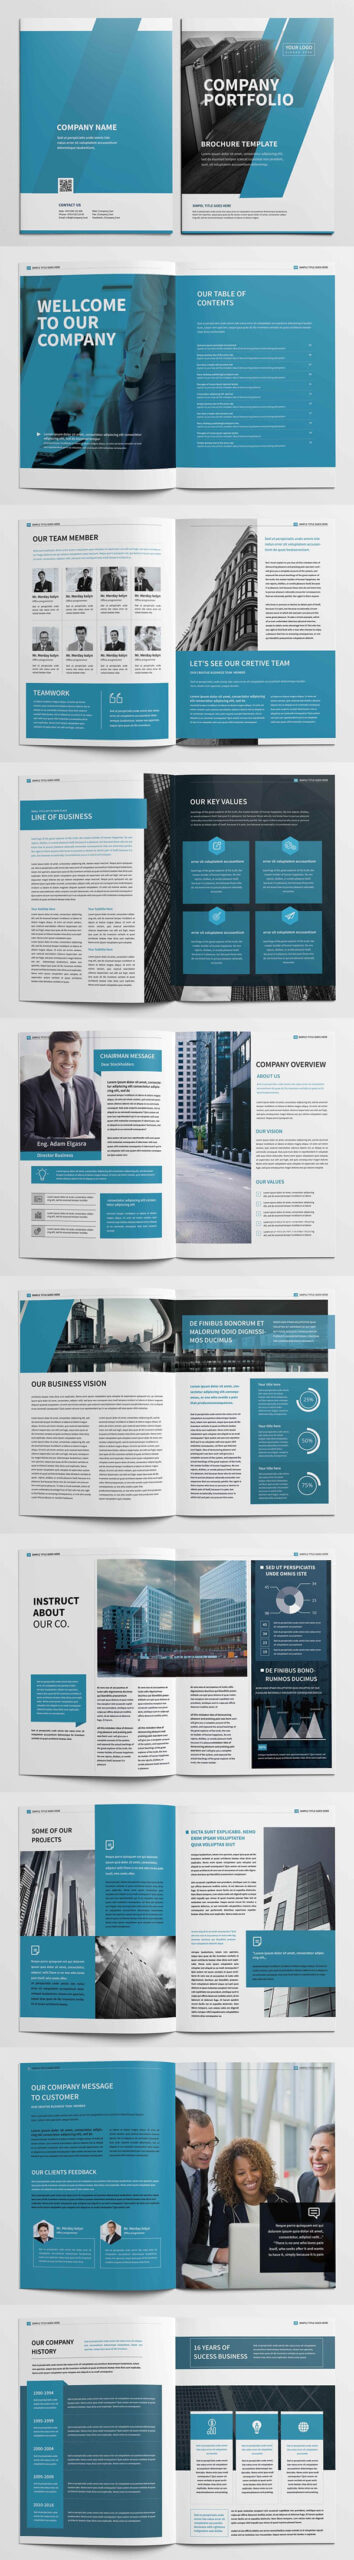 Brochure Templates And Catalog Design | Design | Graphic With Engineering Brochure Templates